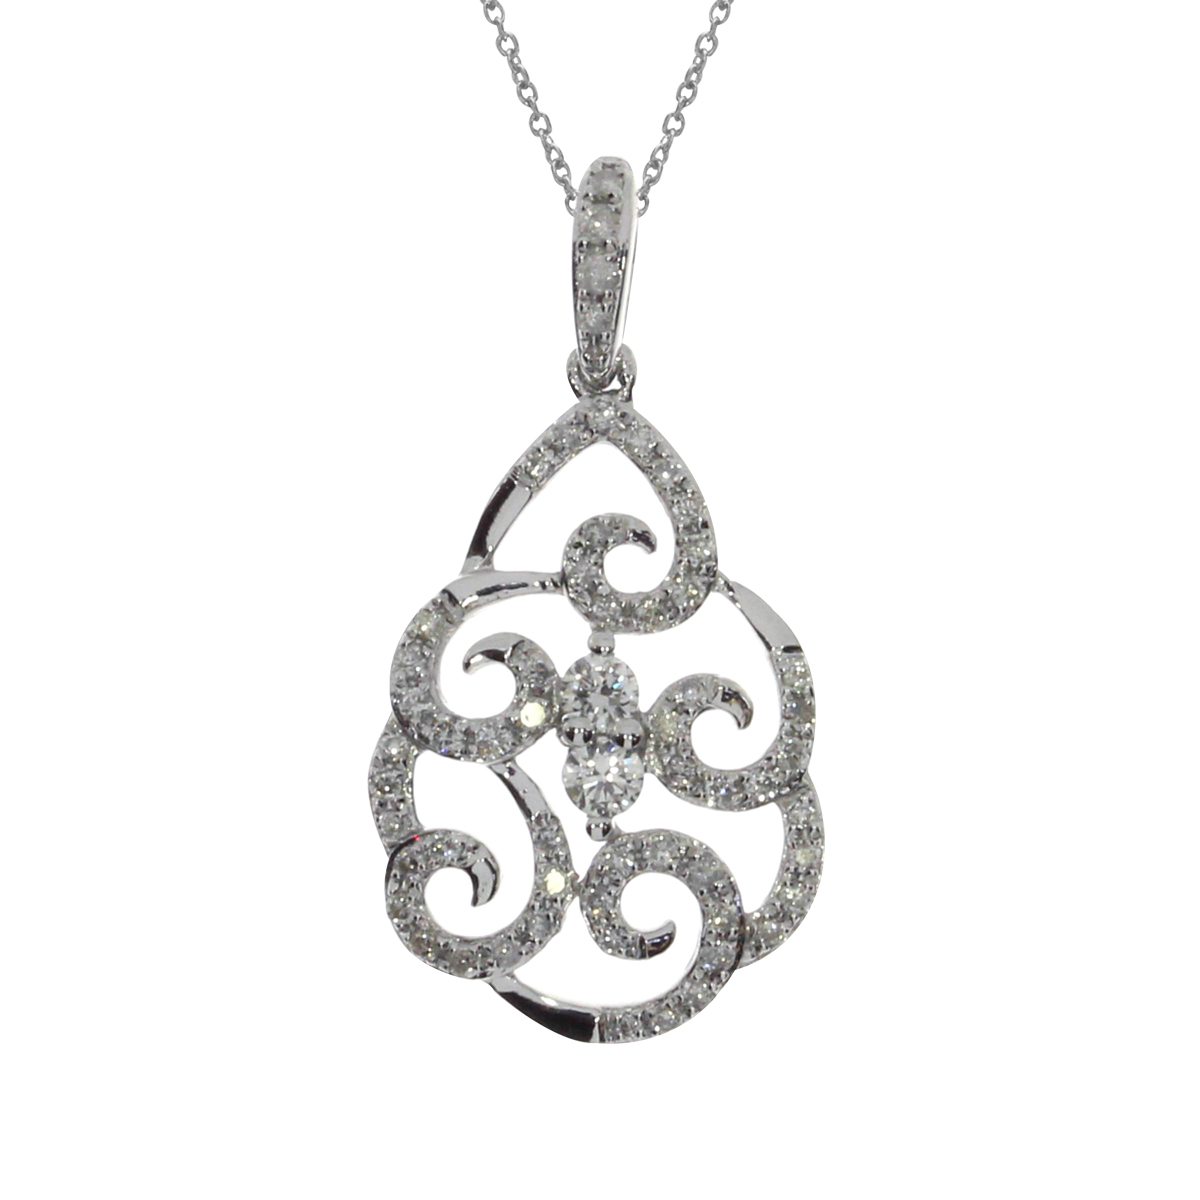 Brilliant .24 total carat diamonds line the 14k white gold swirls in this unique and stunning pendant.